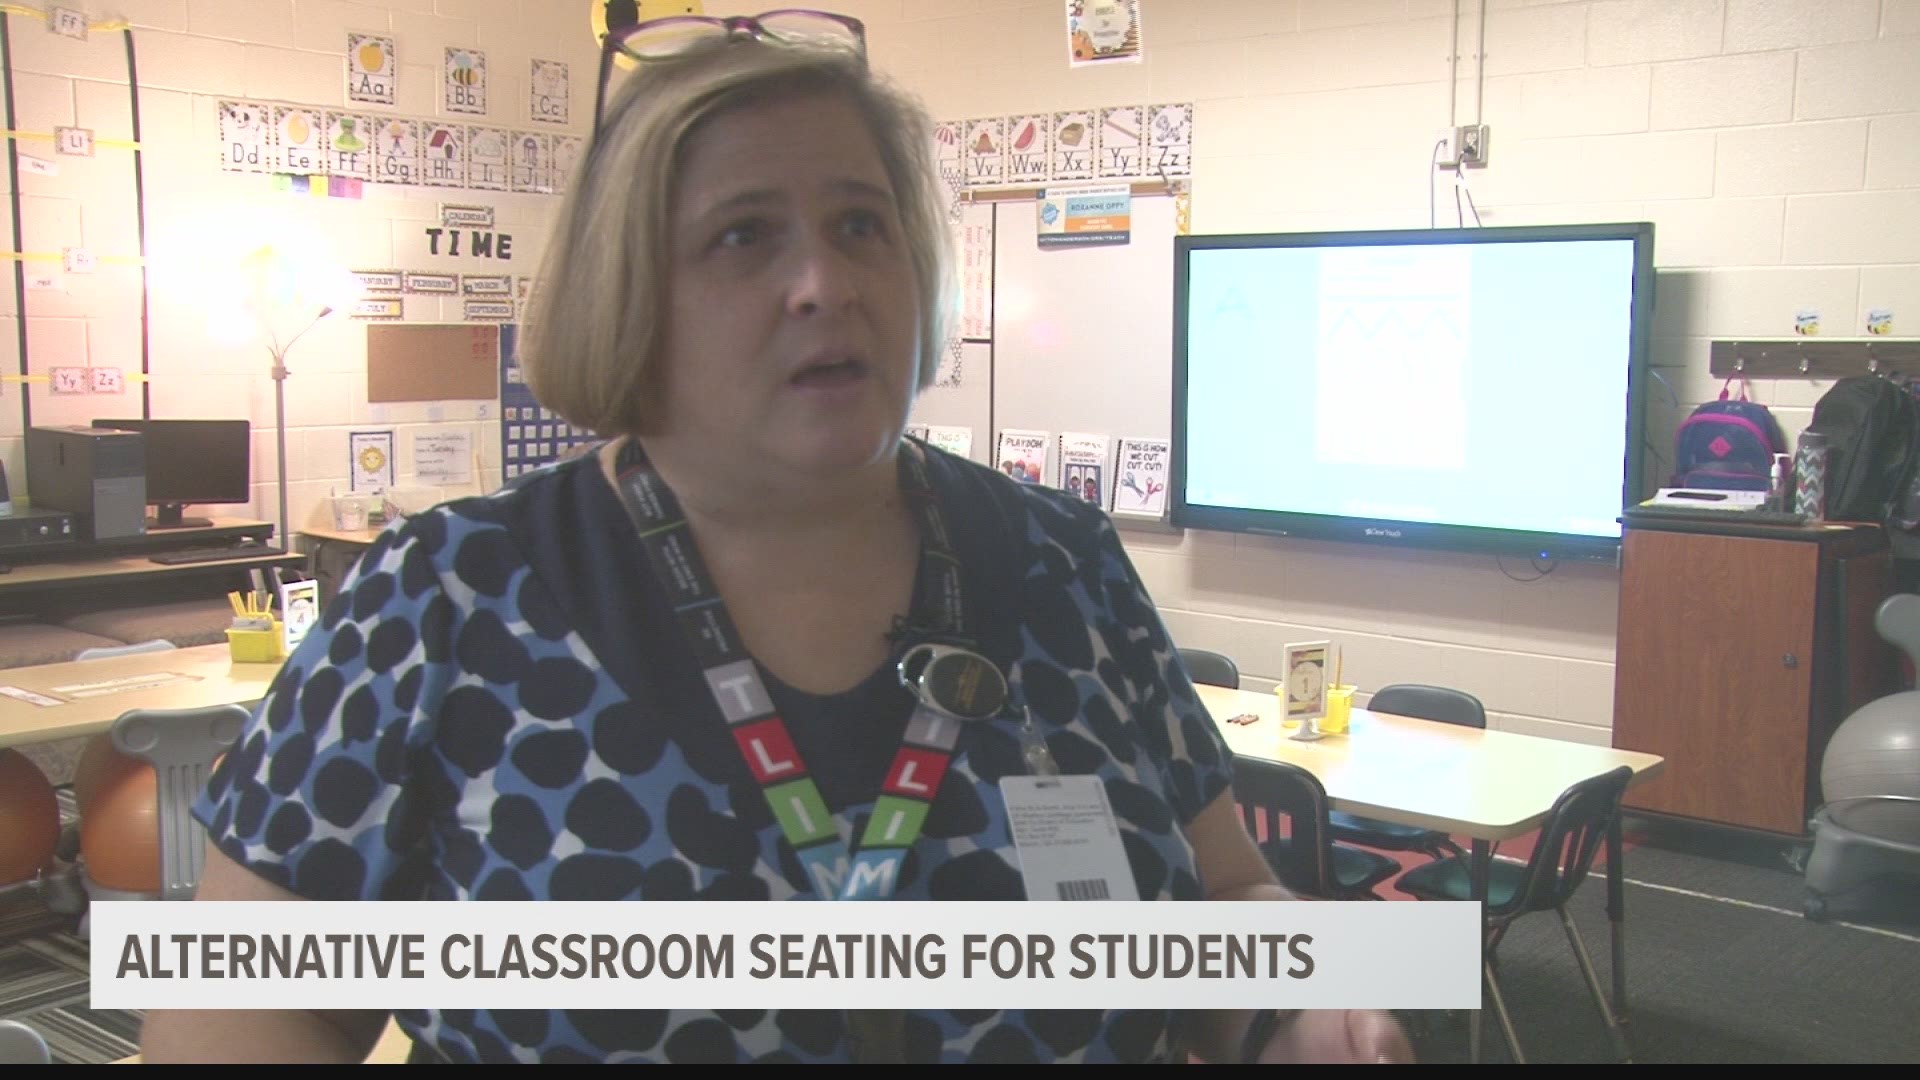 Alternative seating in the classroom may help students focus better